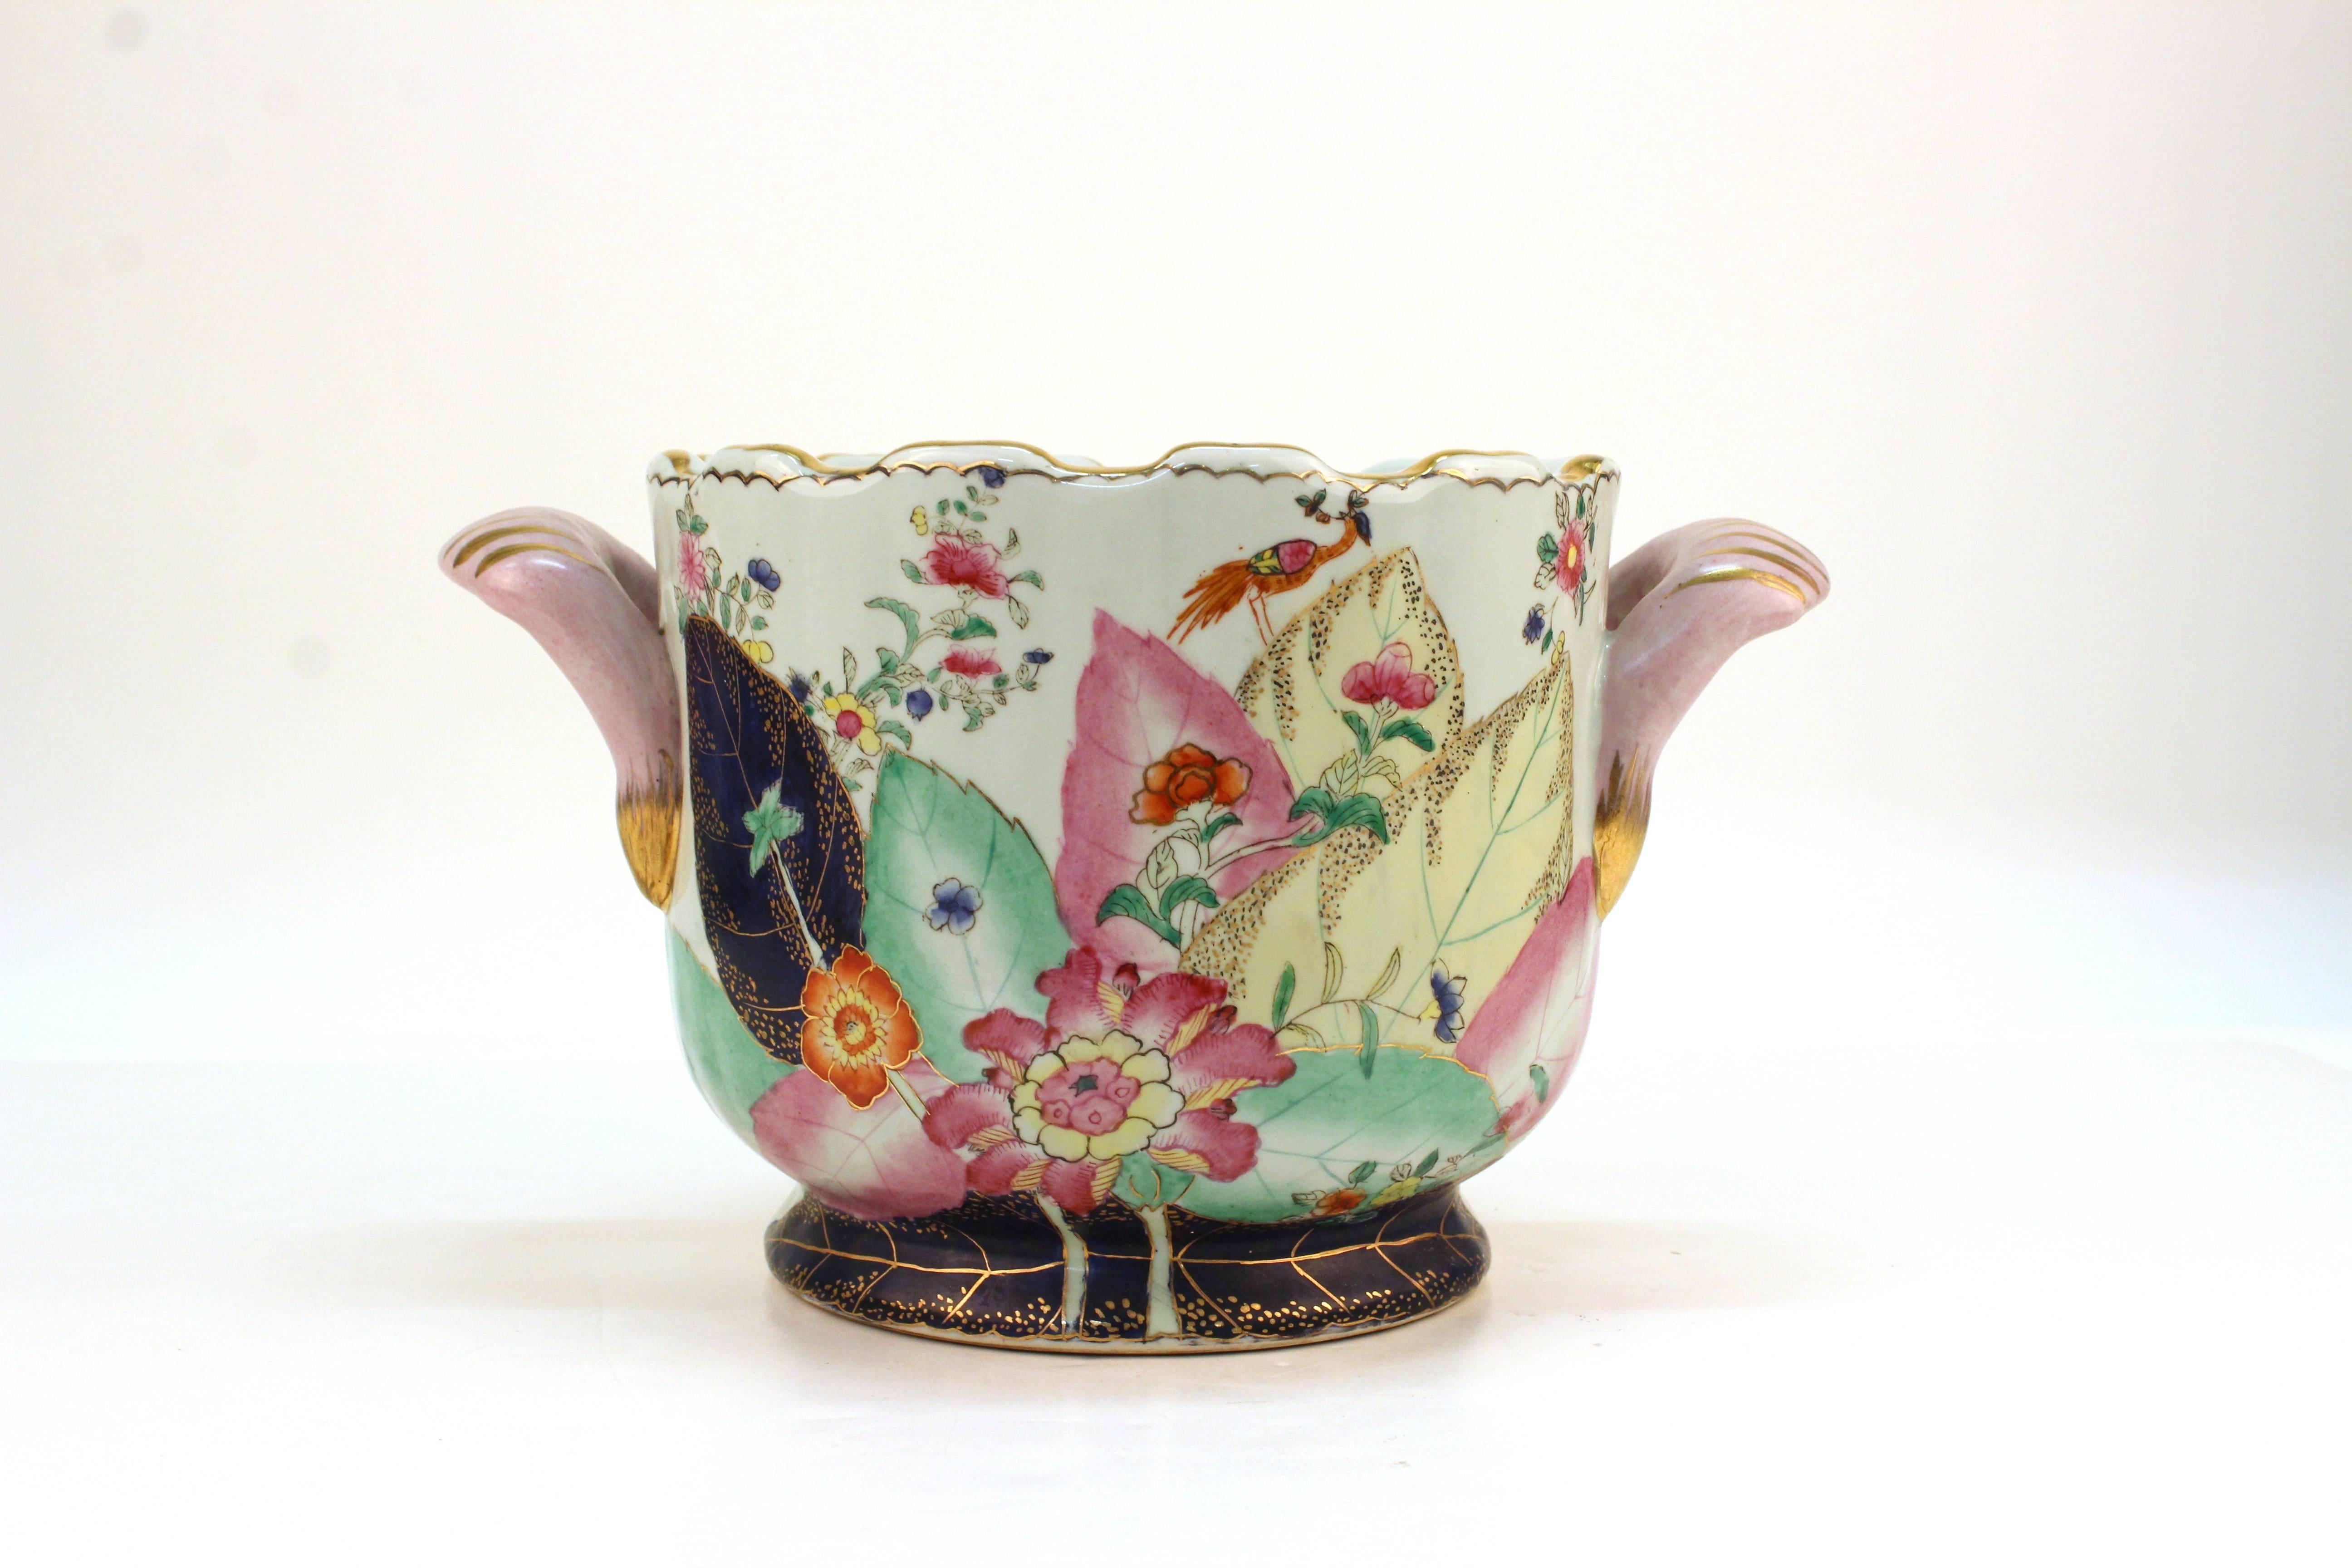 Chinoiserie style porcelain pot with colorful tobacco leaf pattern. Styled with scalloped edges and two handles. Stamped at the bottom with a maker's mark and [porcelain]. Wear appropriate to use. In good condition.